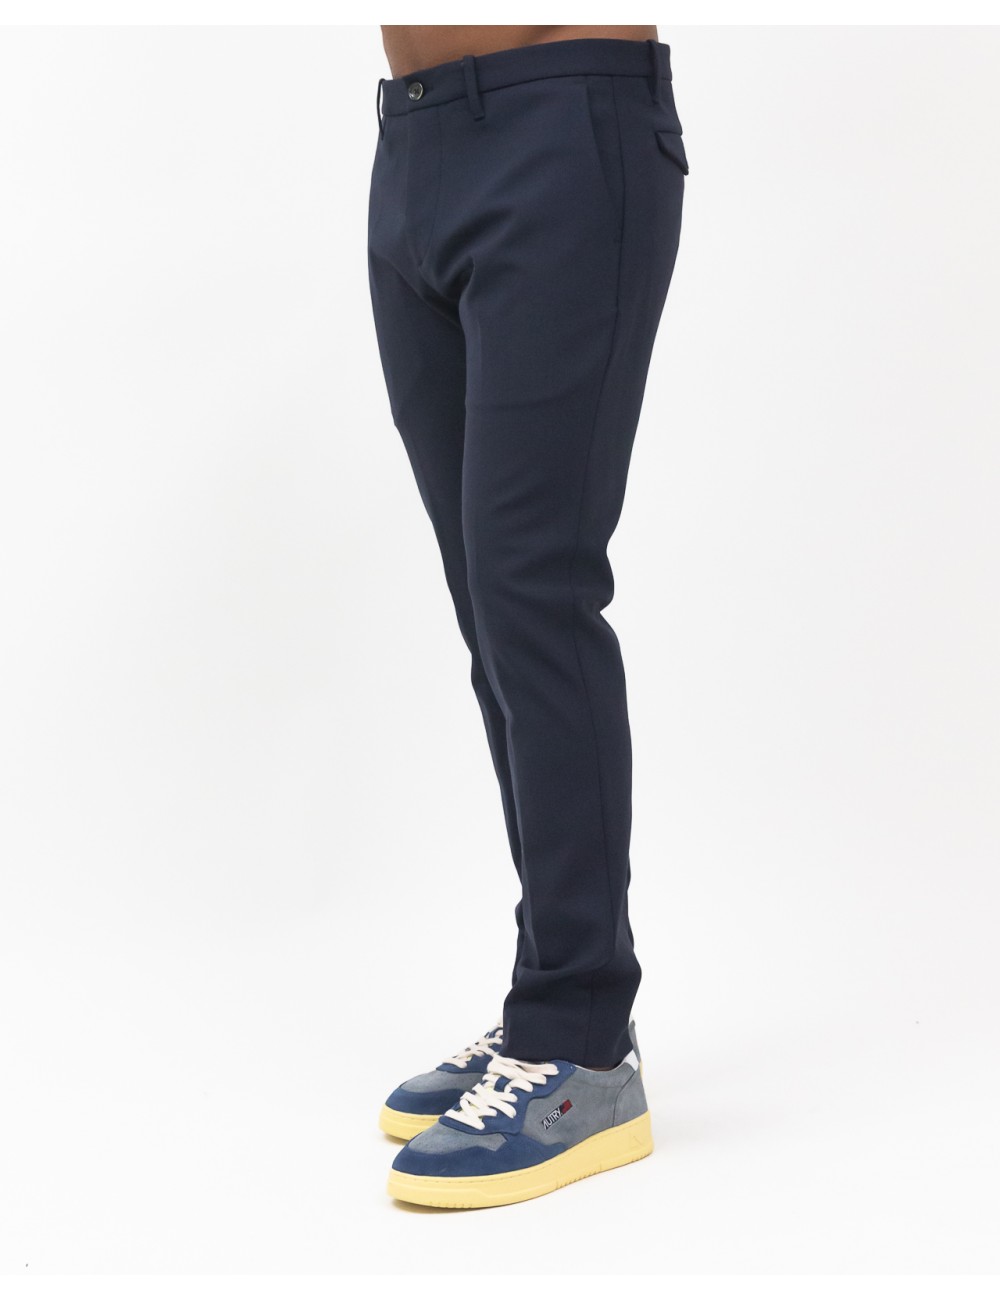 Nine in The Morning - Men's Easy Blue Trousers 9FW23 ES133 NAVY BLUE